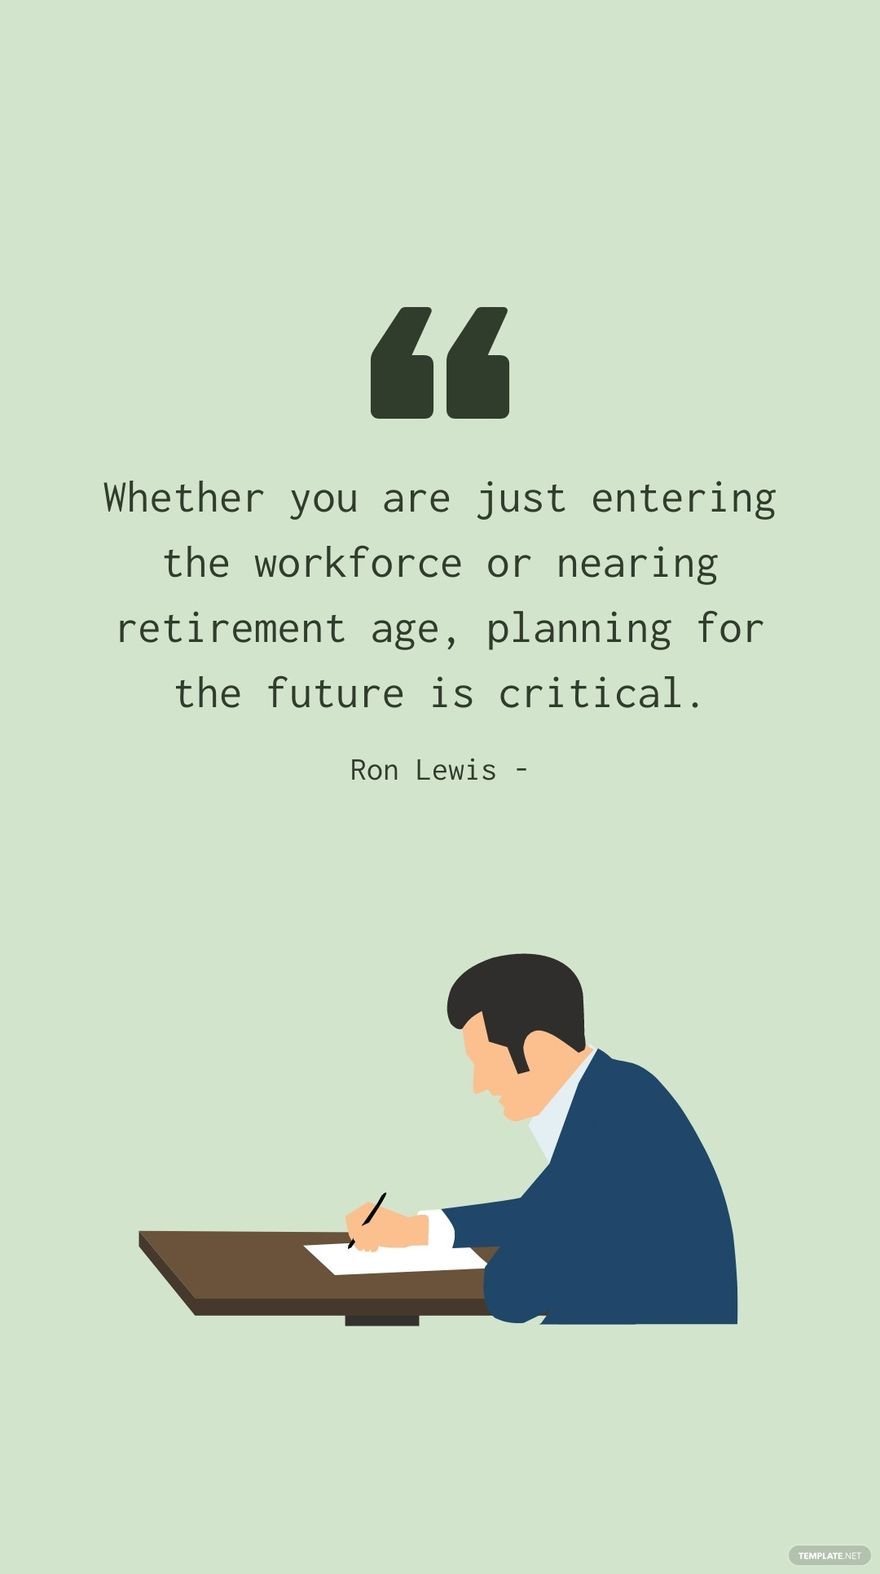 Free Ron Lewis - Whether you are just entering the workforce or nearing retirement age, planning for the future is critical.